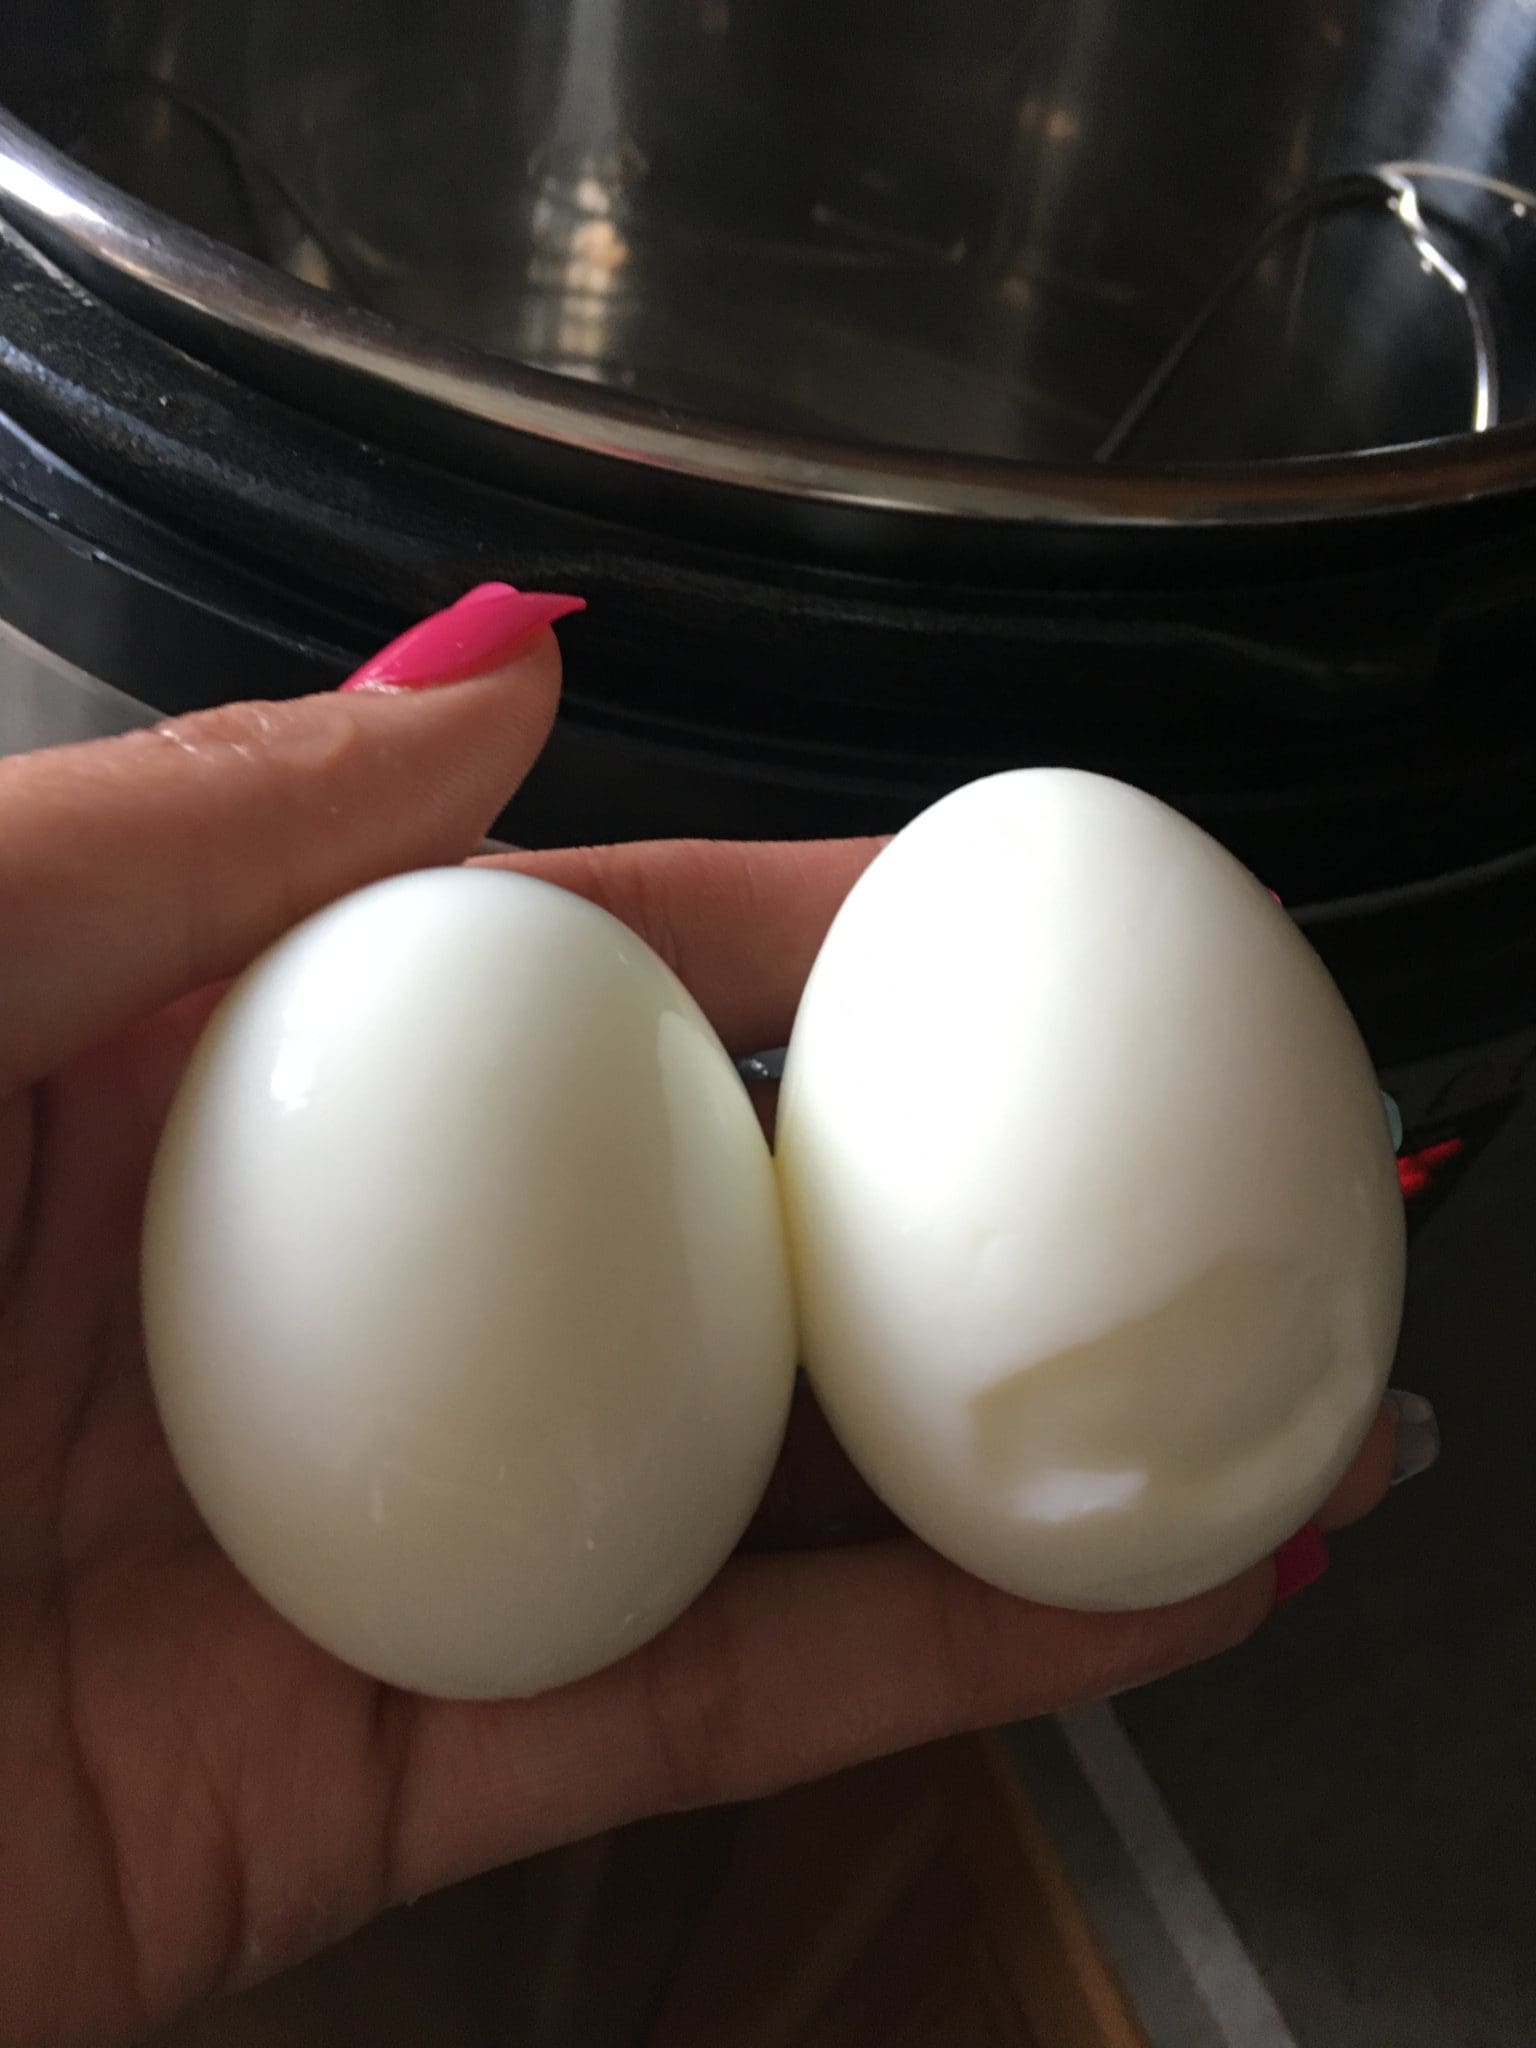 Easy Peel Hard Boiled Eggs Every Time graphic